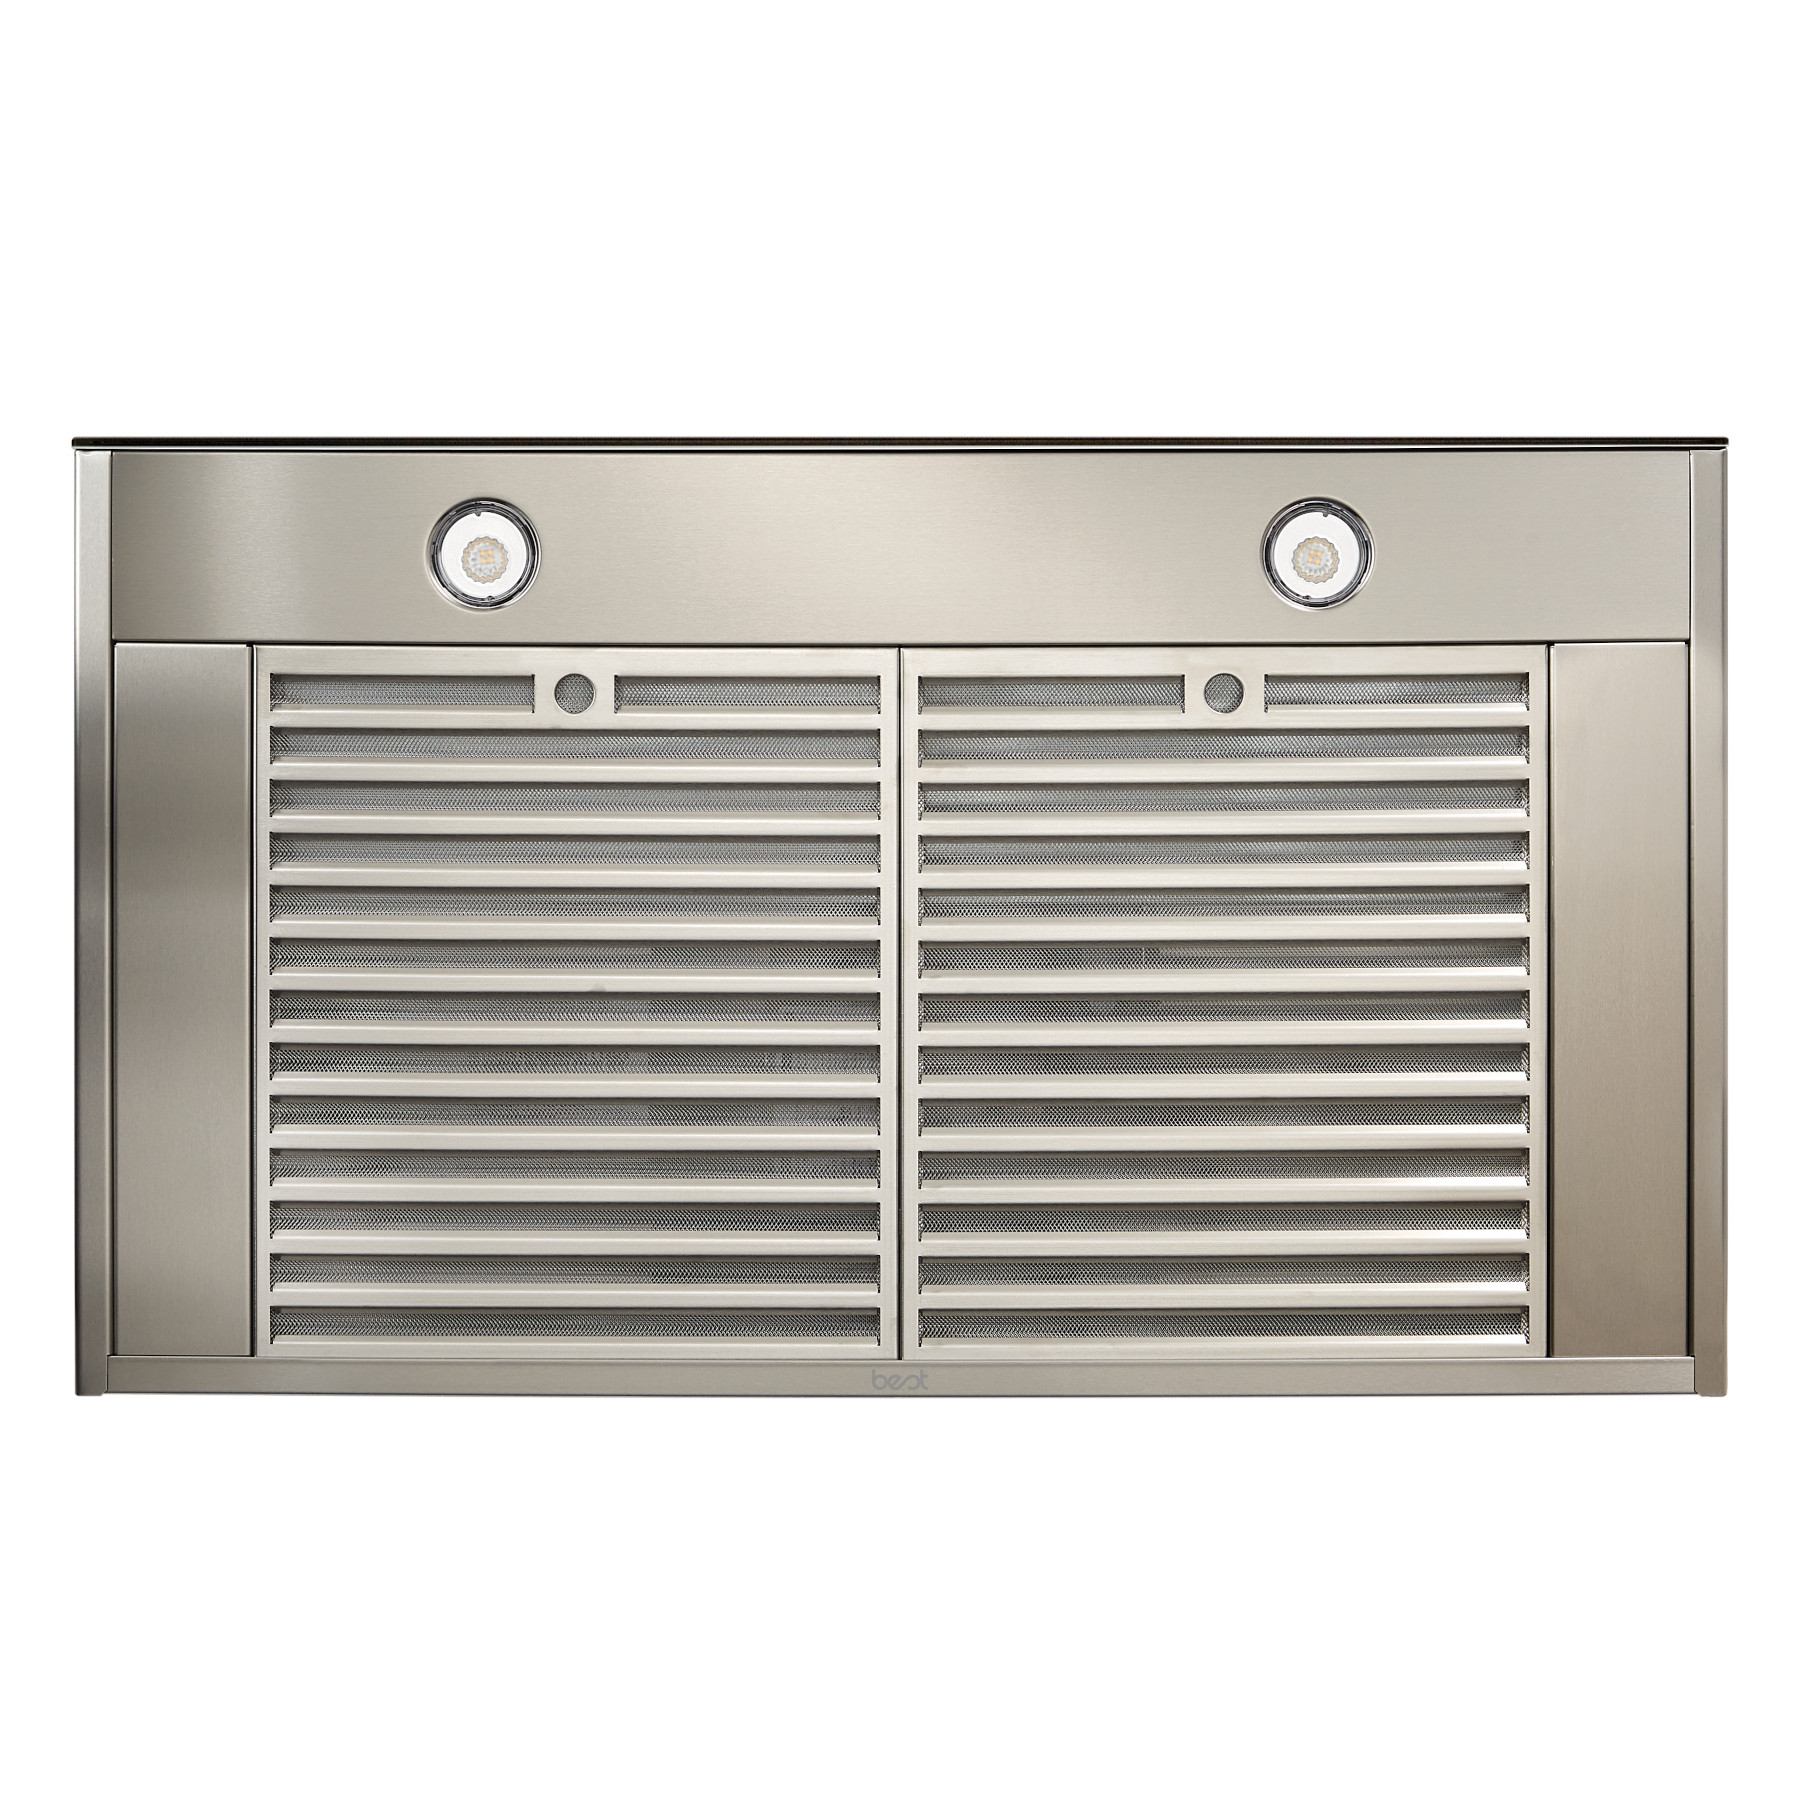 UP26M30SB Best 30-inch Pro-Style Range Hood, blower sold separately,  Stainless Steel (UP26 Series) - Metro Appliances & More